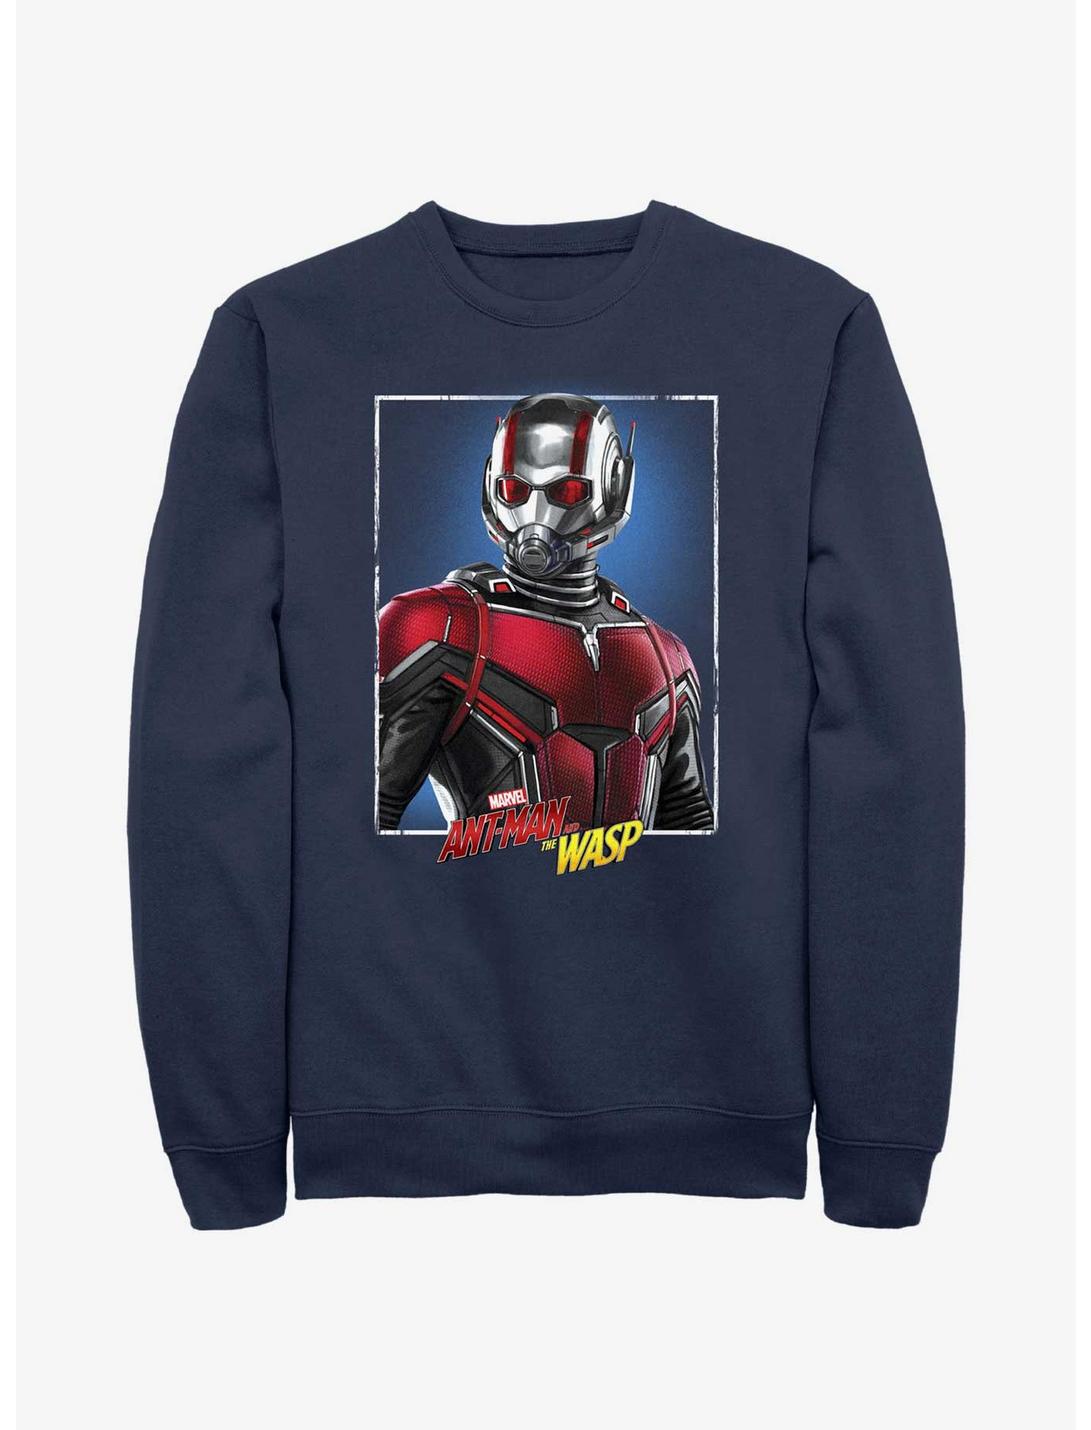 Marvel Ant-Man and the Wasp: Quantumania Ant-Man Portrait Sweatshirt, NAVY, hi-res